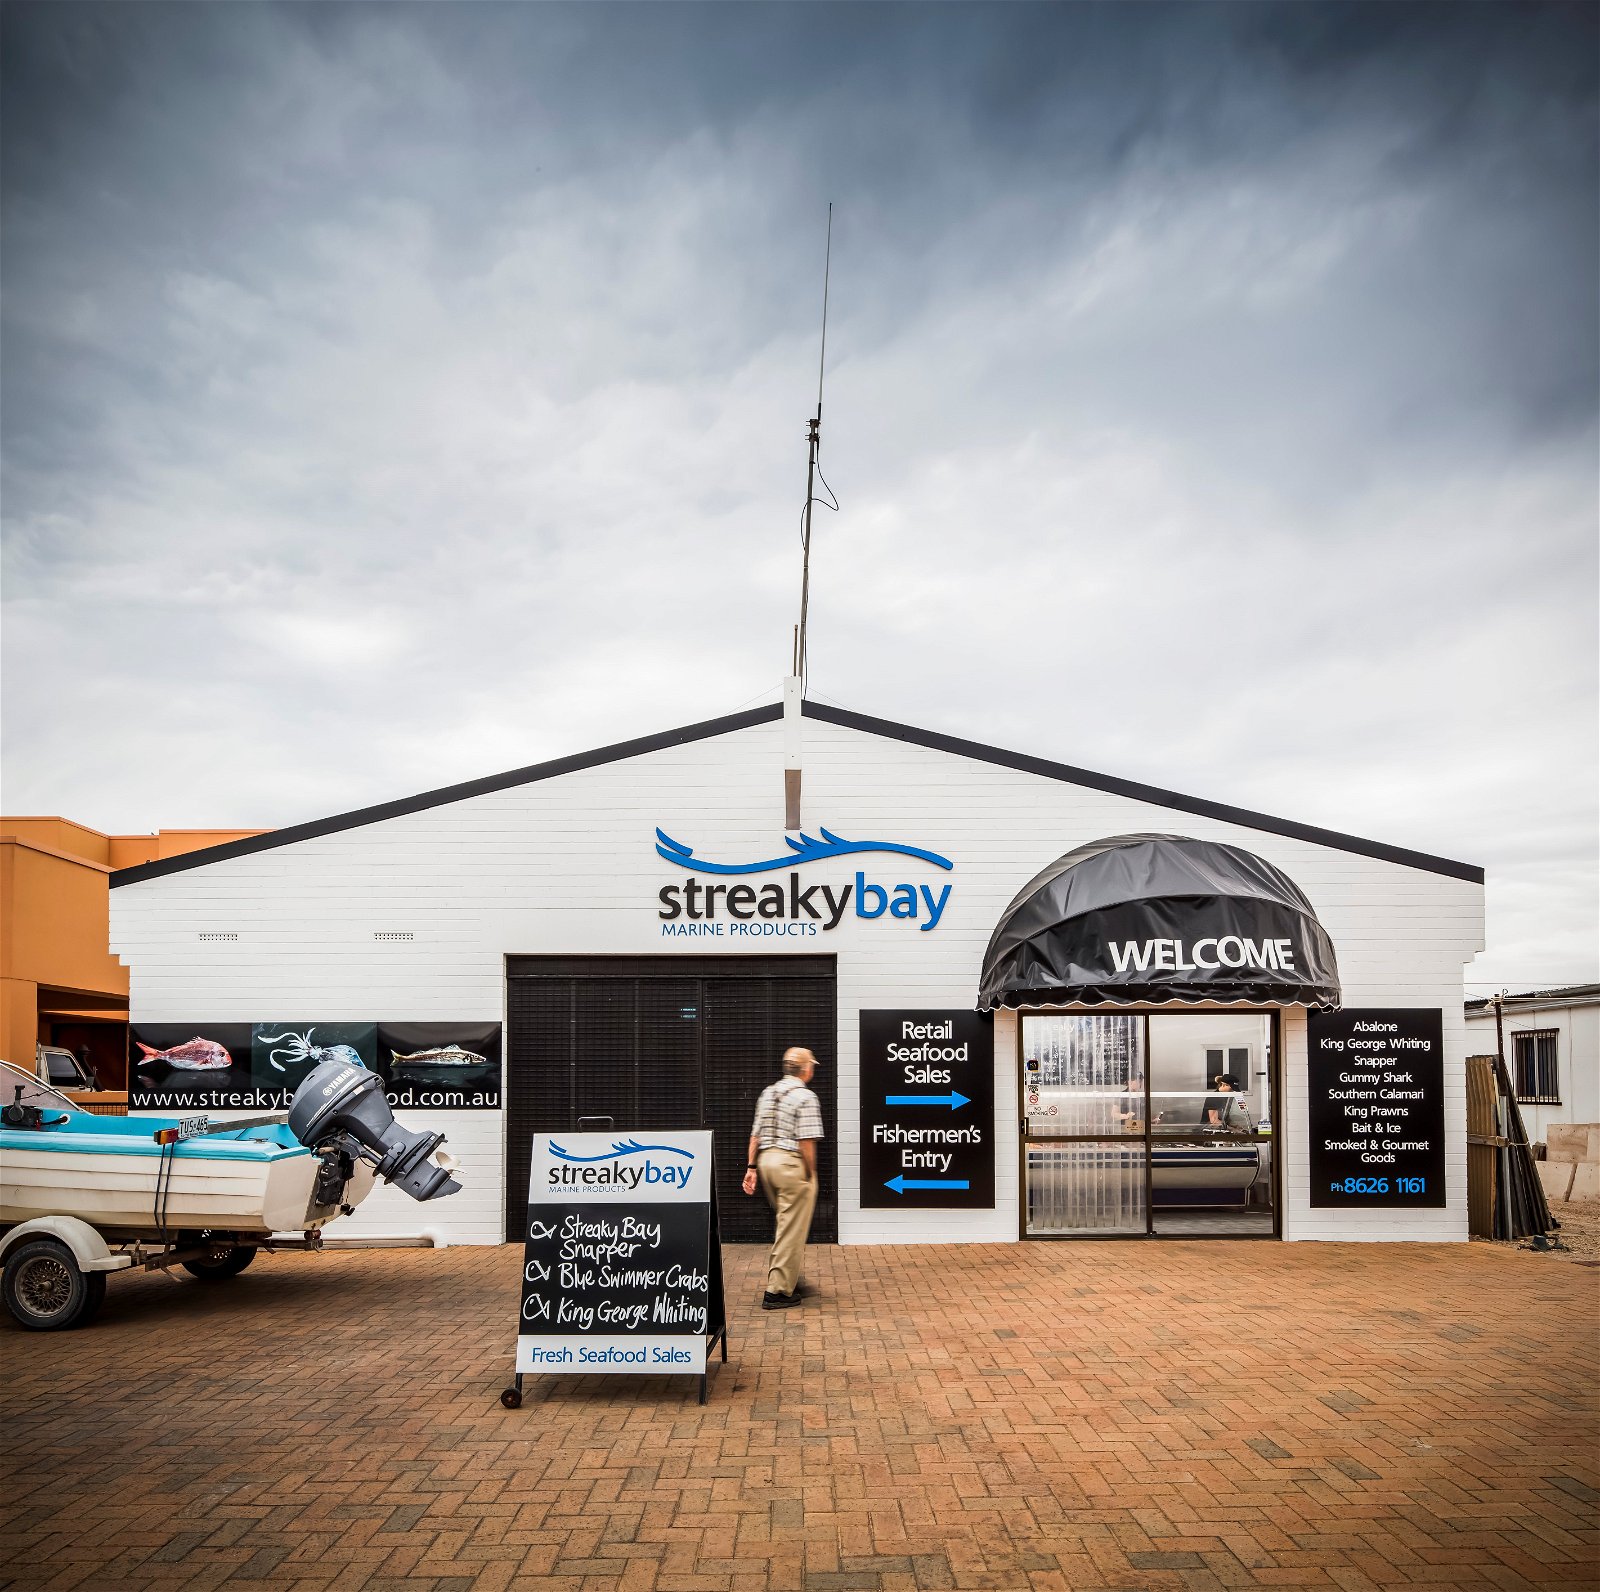 Streaky Bay Marine Products - Northern Rivers Accommodation